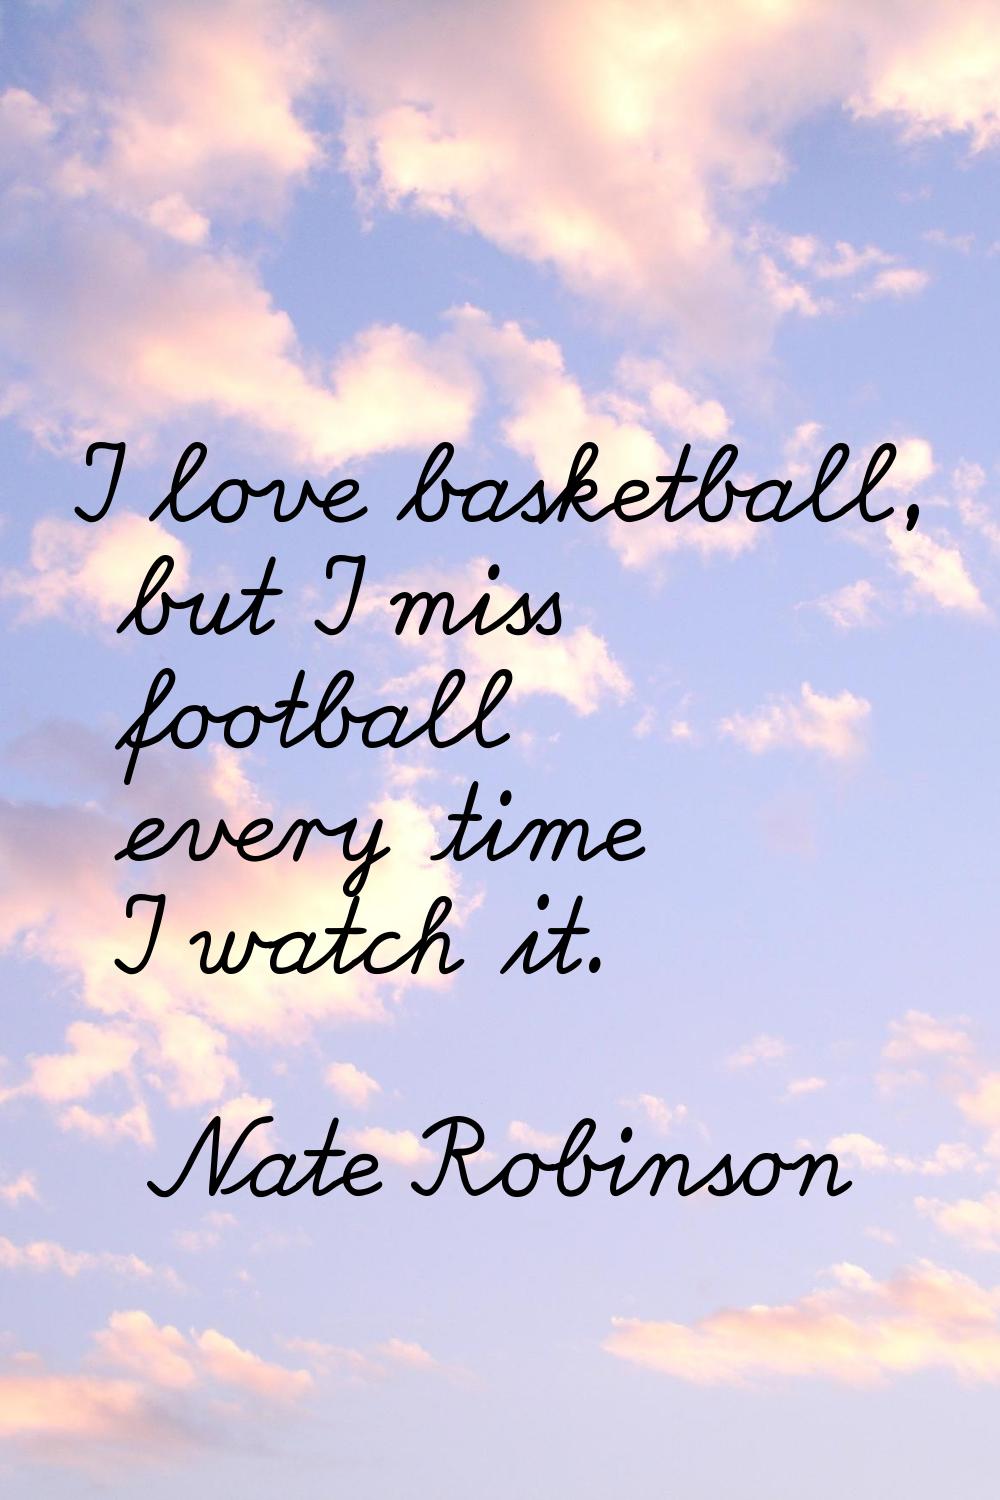 I love basketball, but I miss football every time I watch it.